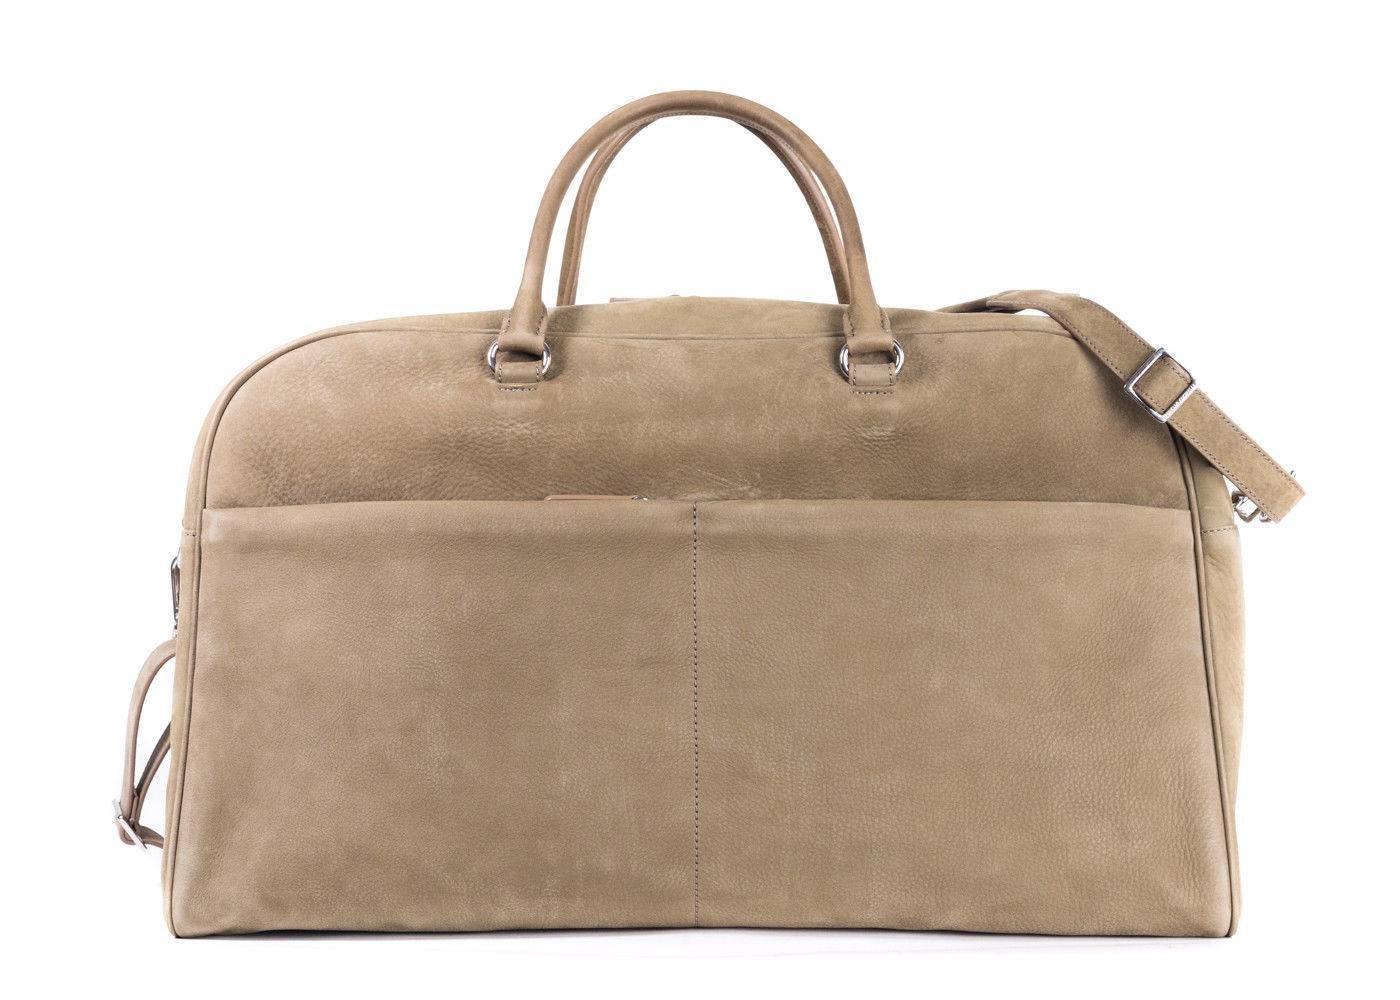 Brand New Brunello Cucinelli Duffle Travel Bag
Dust Bag Included
Retails in Stores & Online for $4140

Brunello Cucinelli's demonstrates again the heritage label's impeccable craftsmanship. Made in Italy from fine nubuck leather, this handsome piece